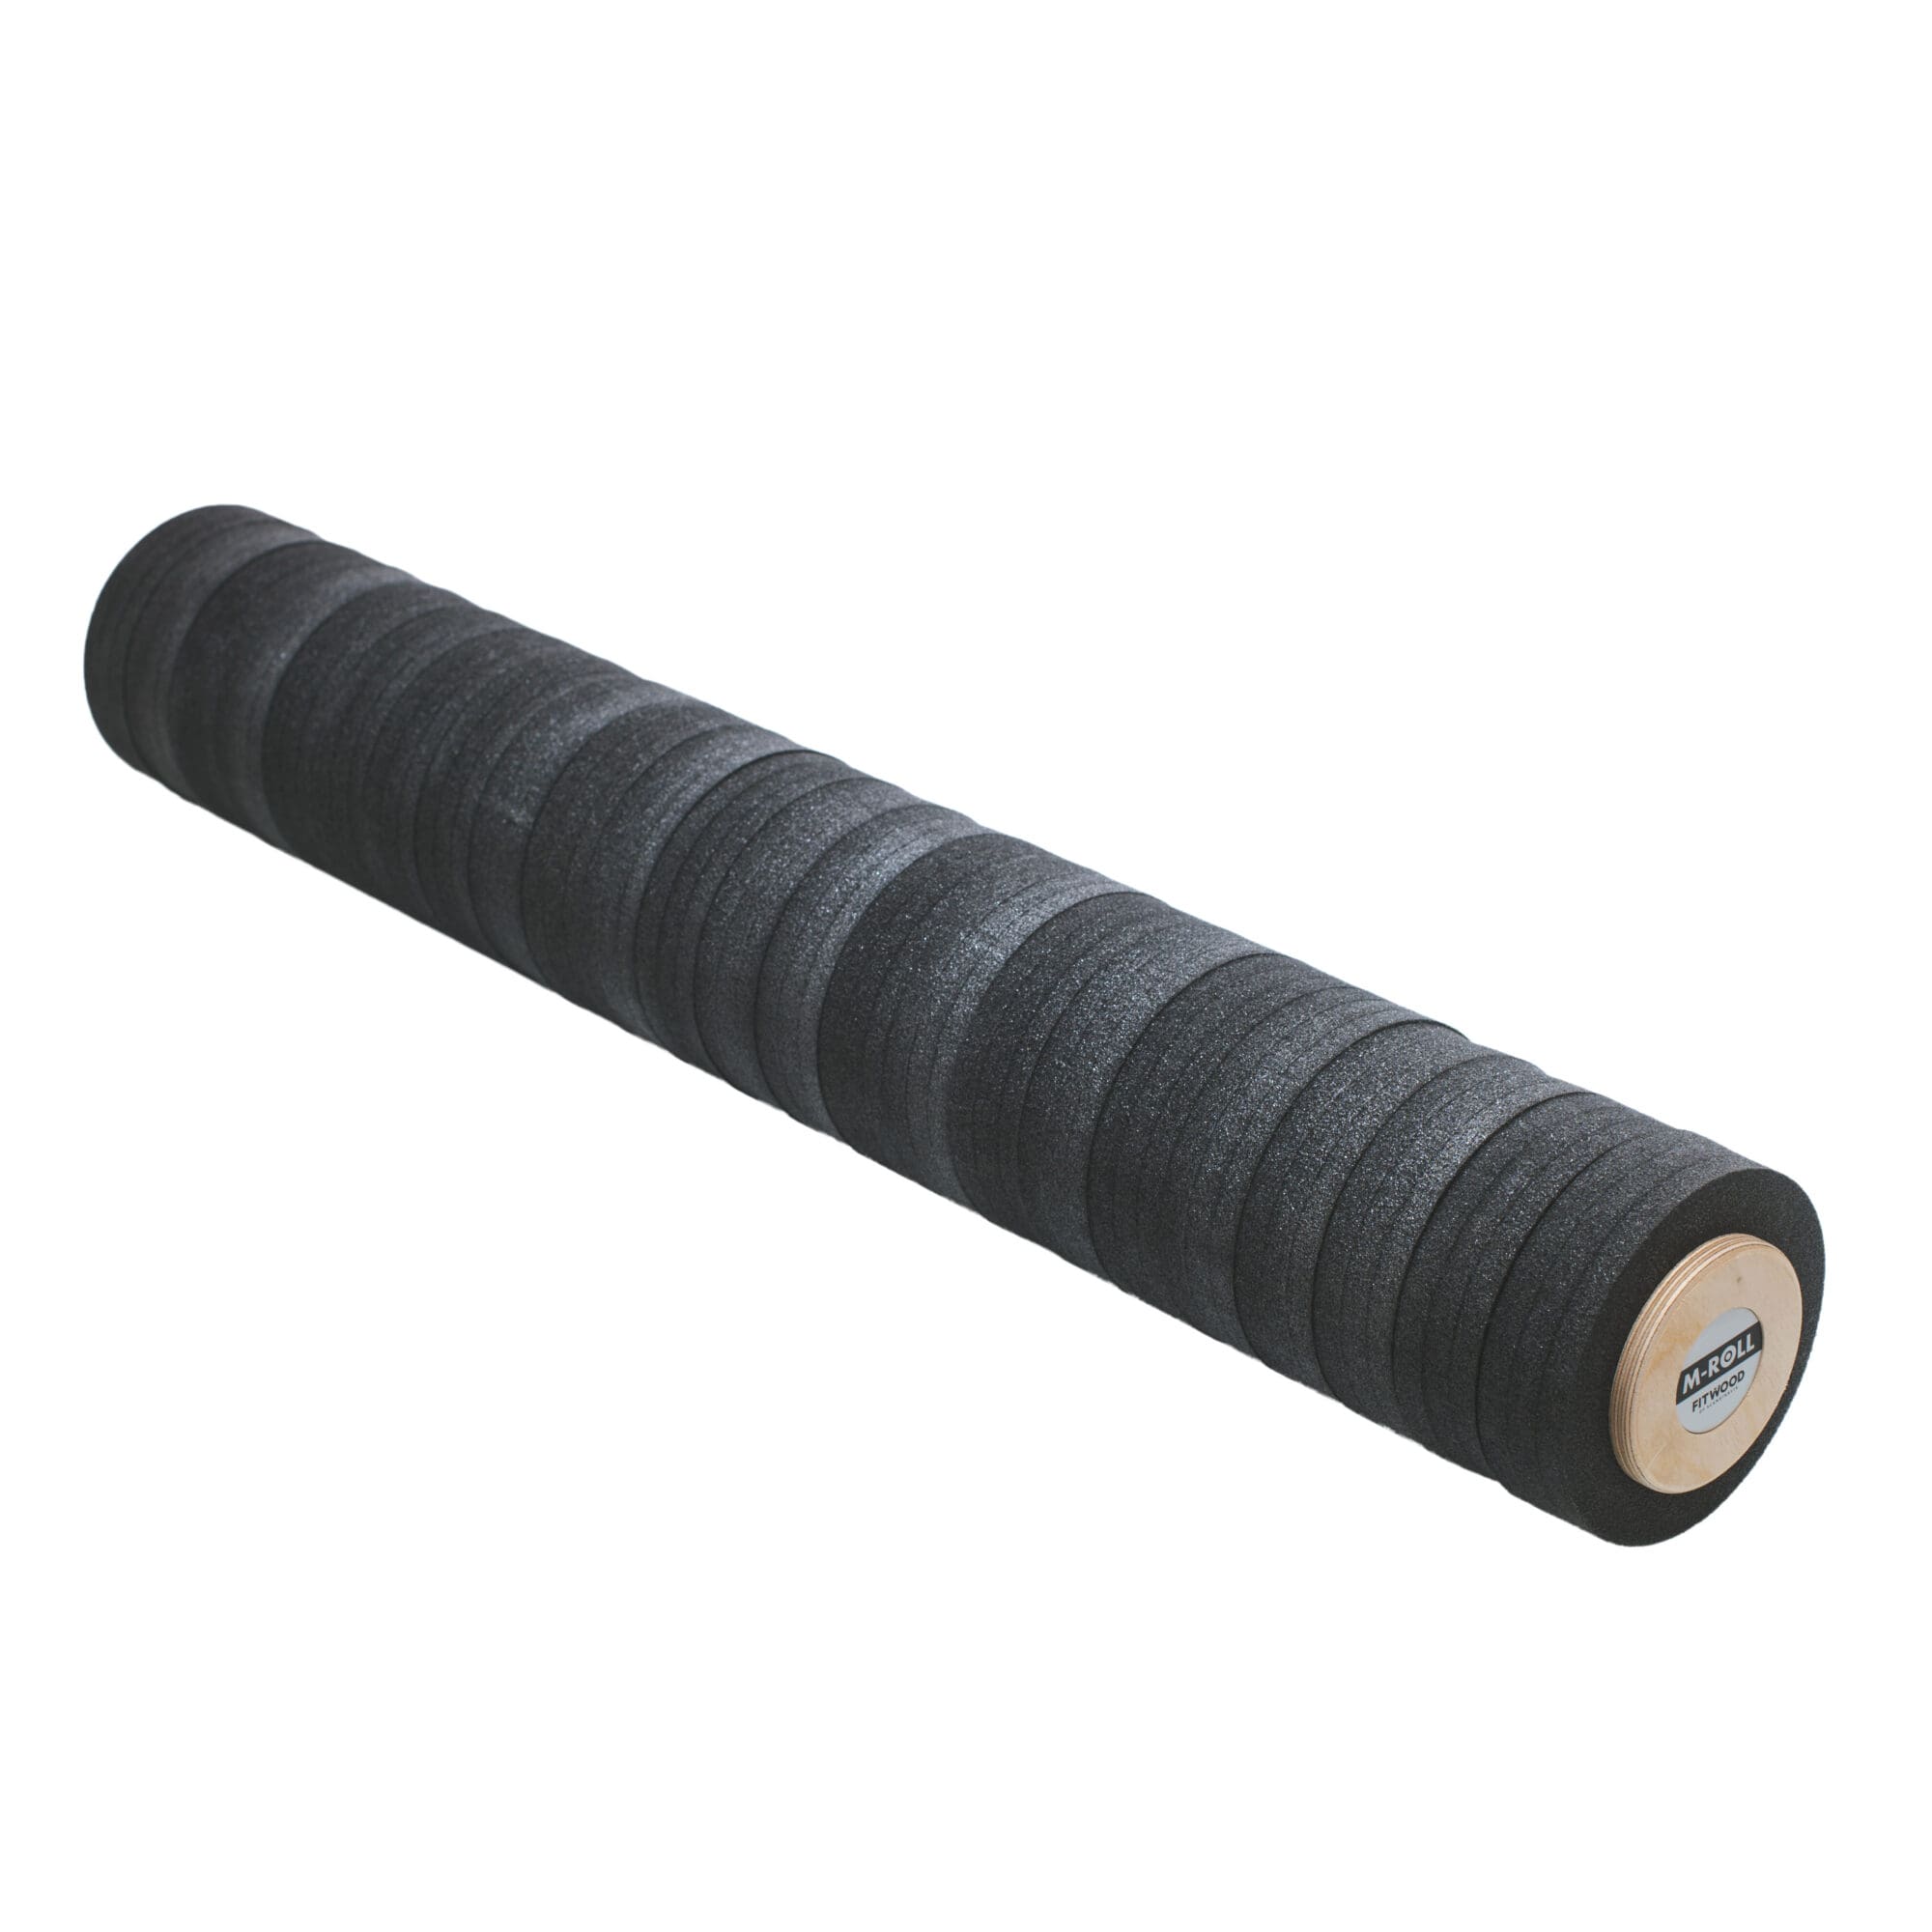 FitWood_M-ROLL_85_pilates_roller _birch_wood_graphite_grey_covering_product_image